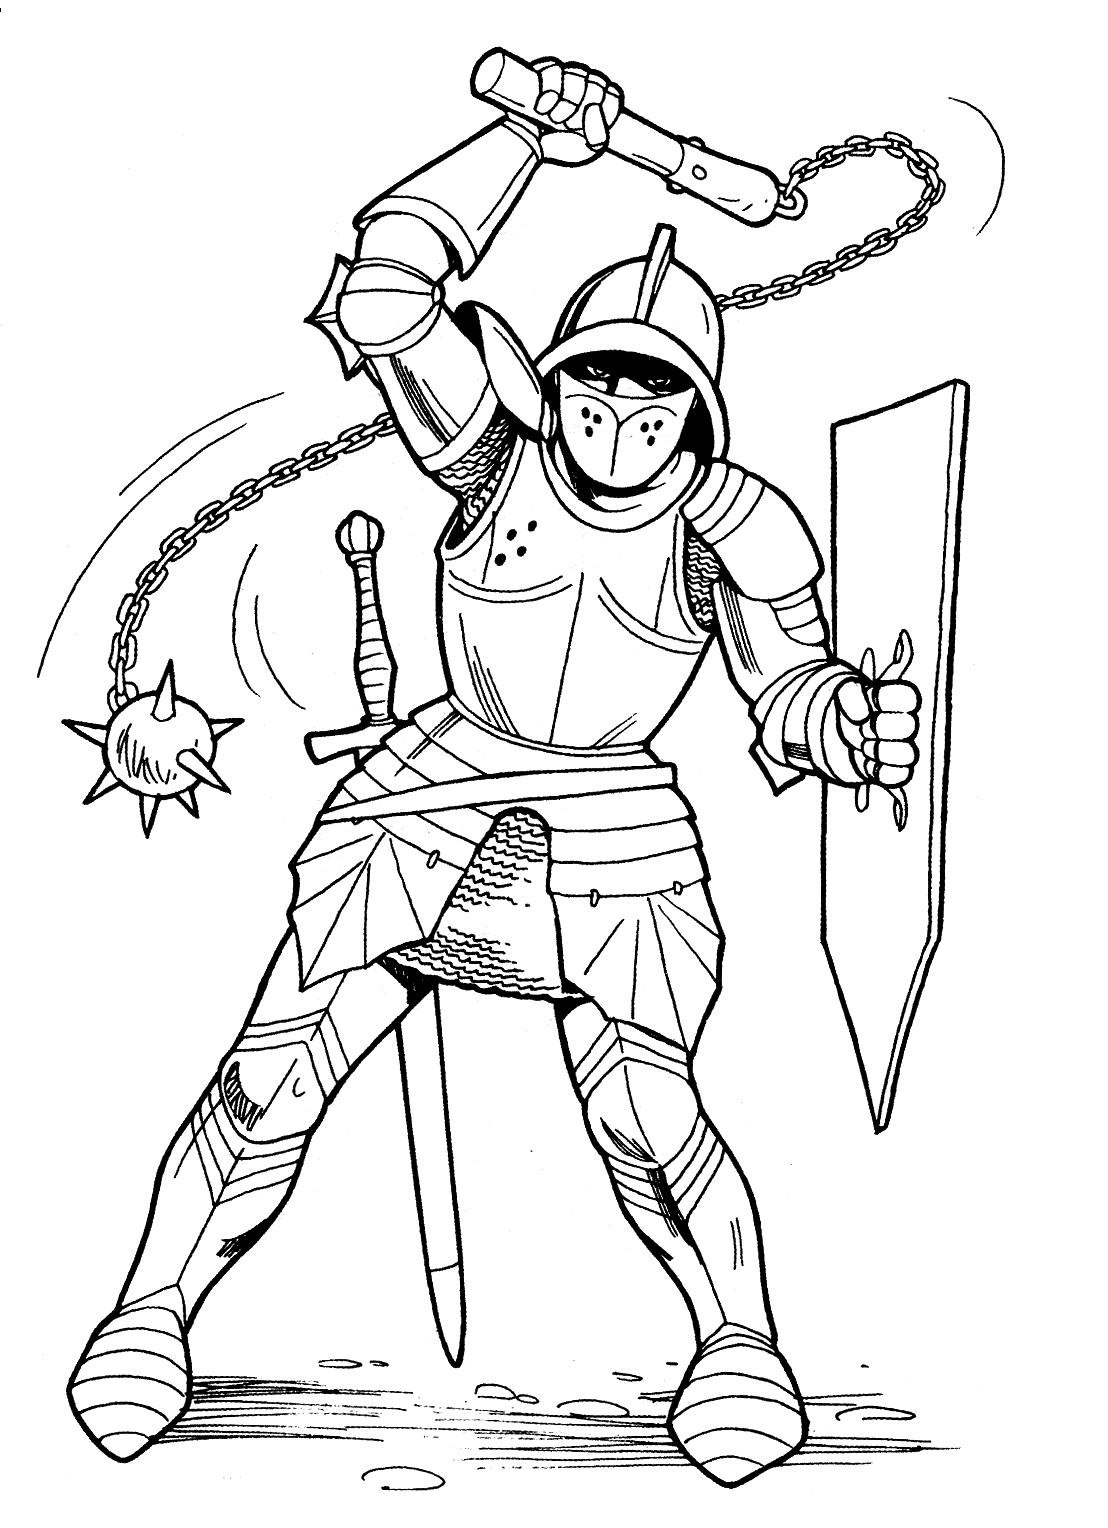 Coloring page - Knight with mace